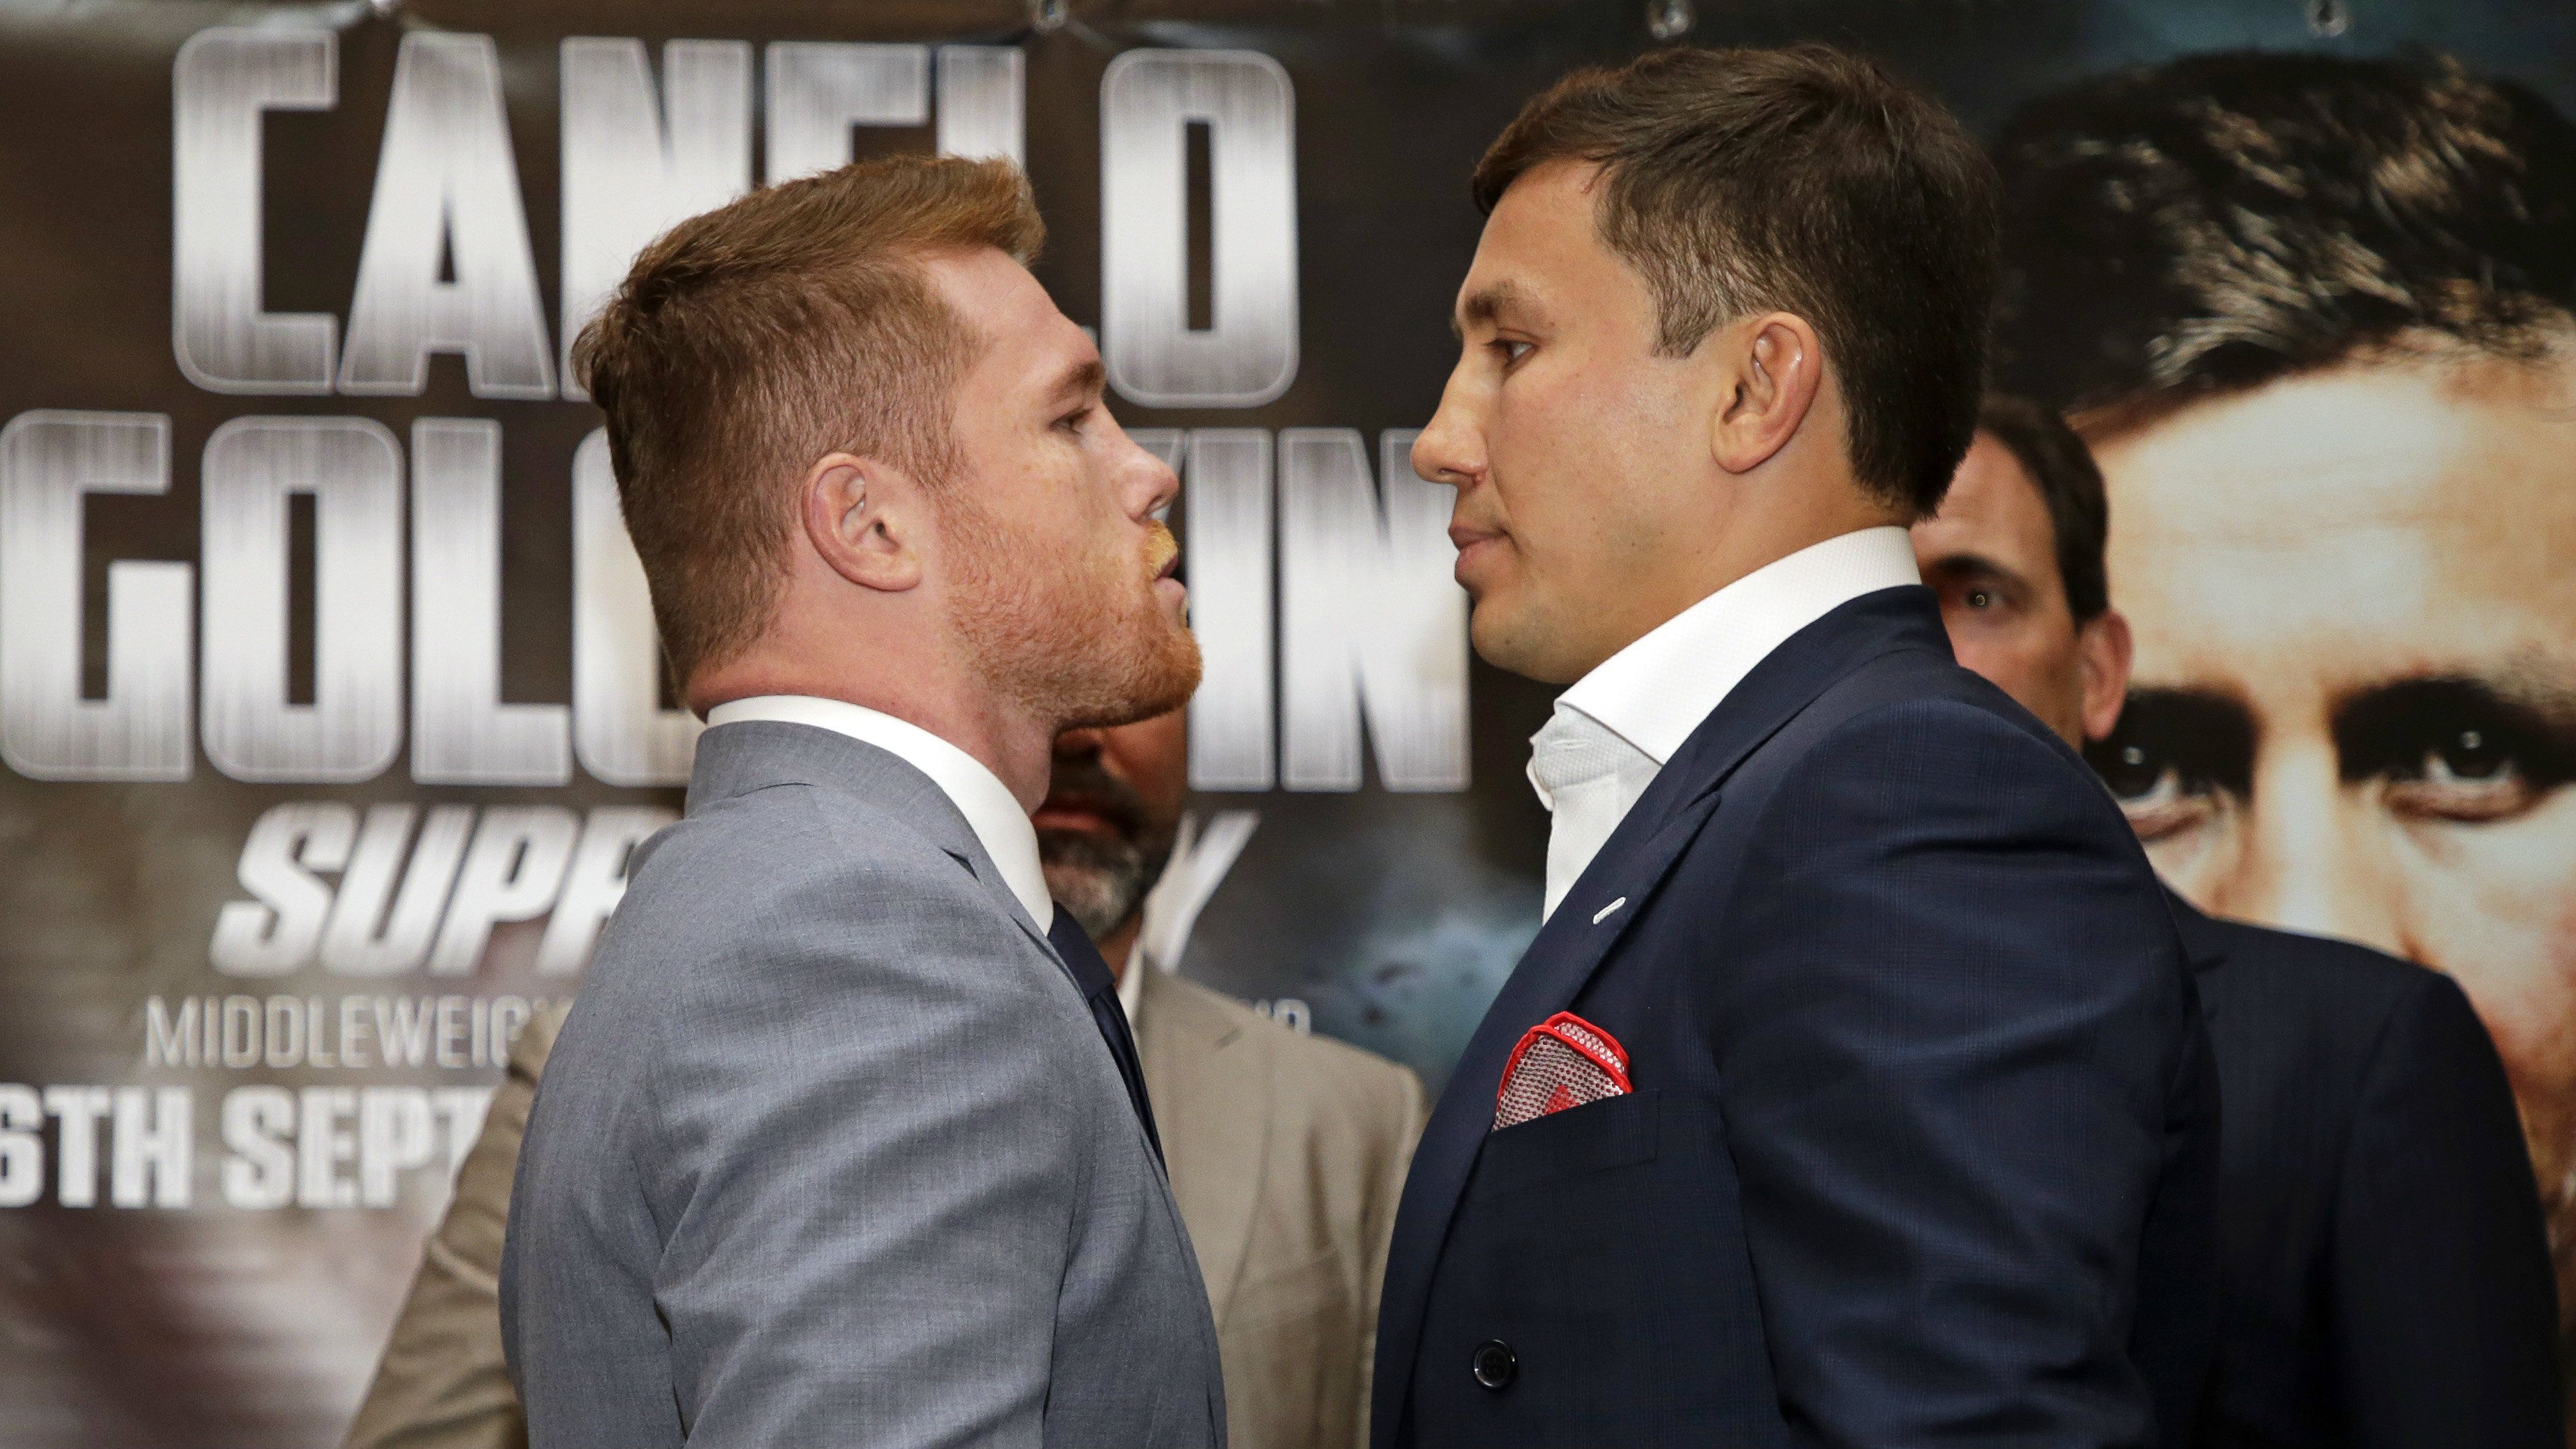 Historic Rematch Between Canelo Alvarez and Gennady Golovkin - Live in Movi...